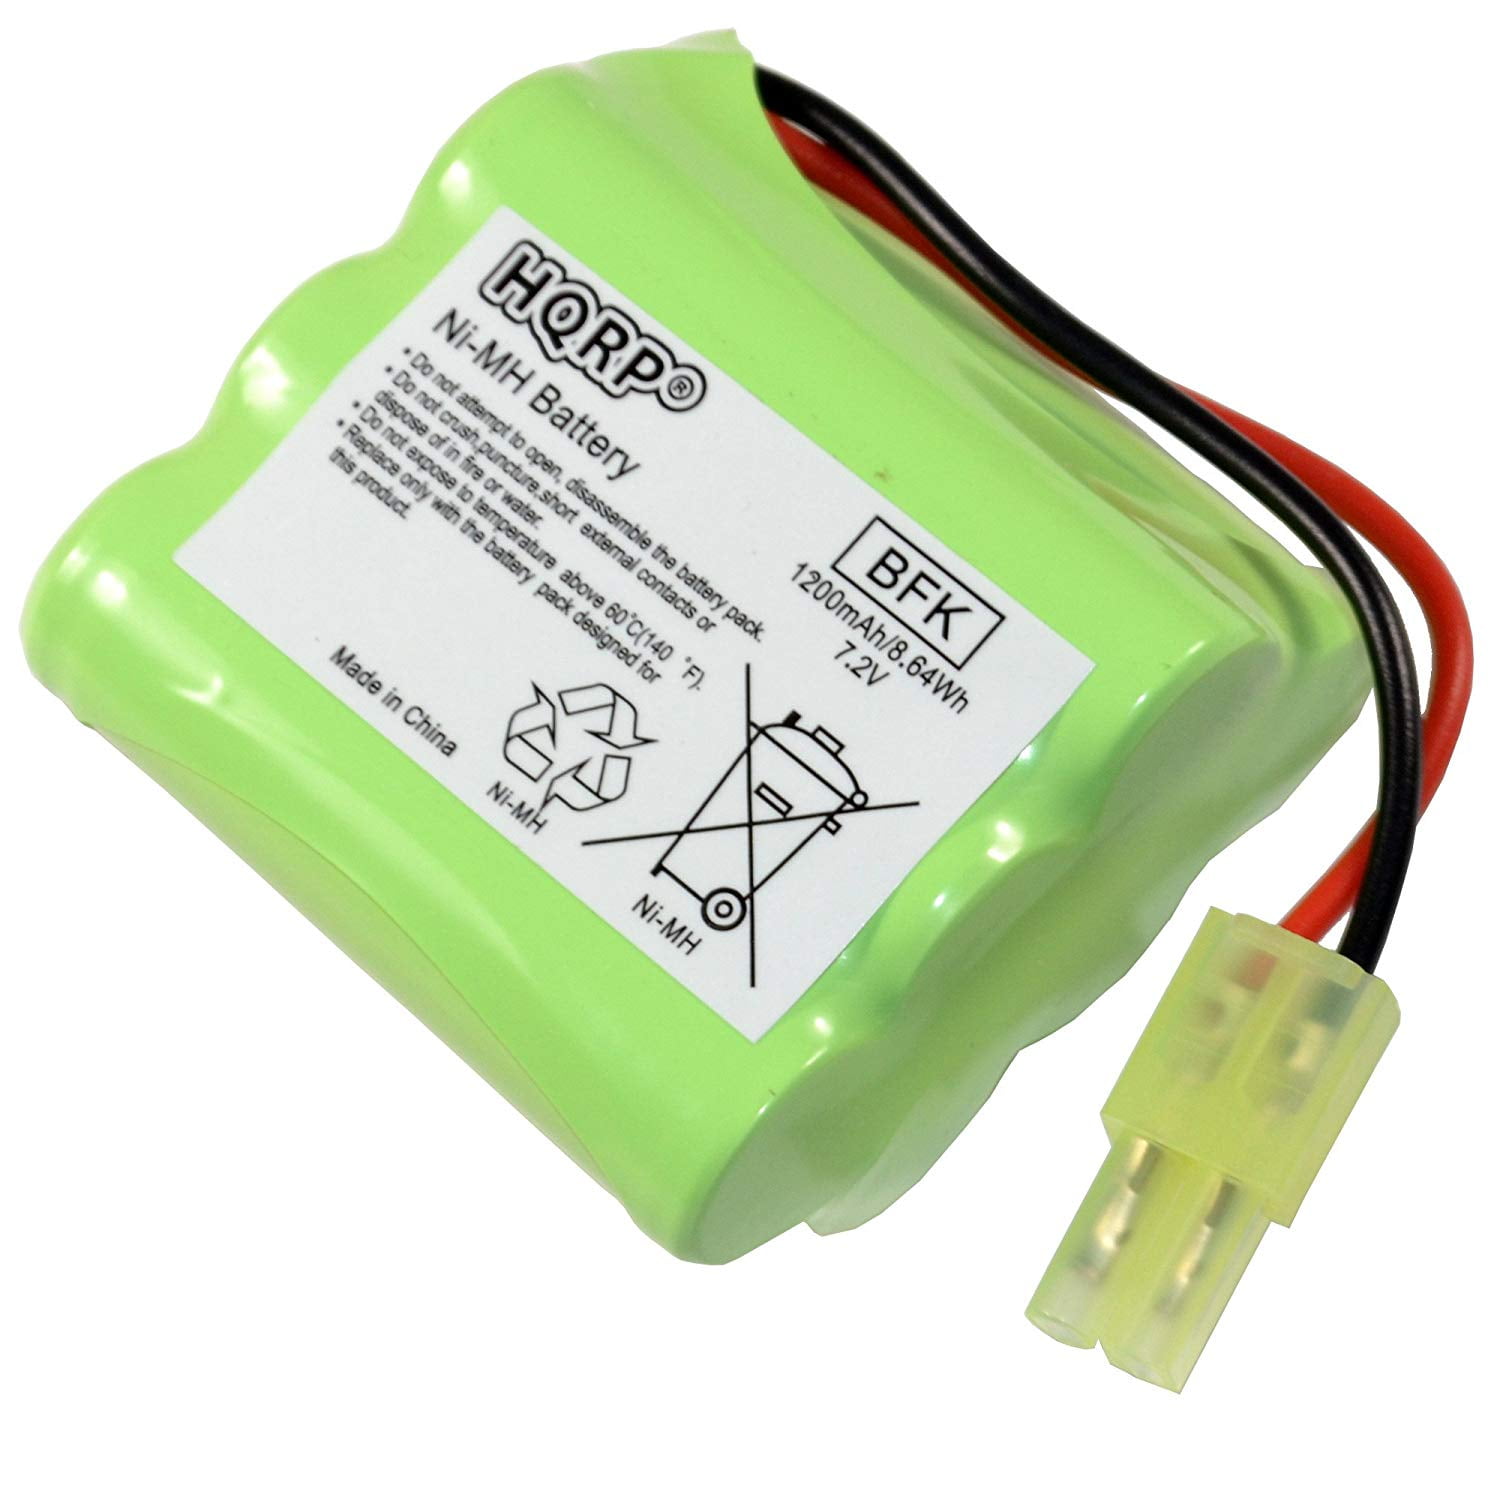 7.2v 1200mAh Ni-MH Battery Pack Replacement for Shark Carpet Sweeper 